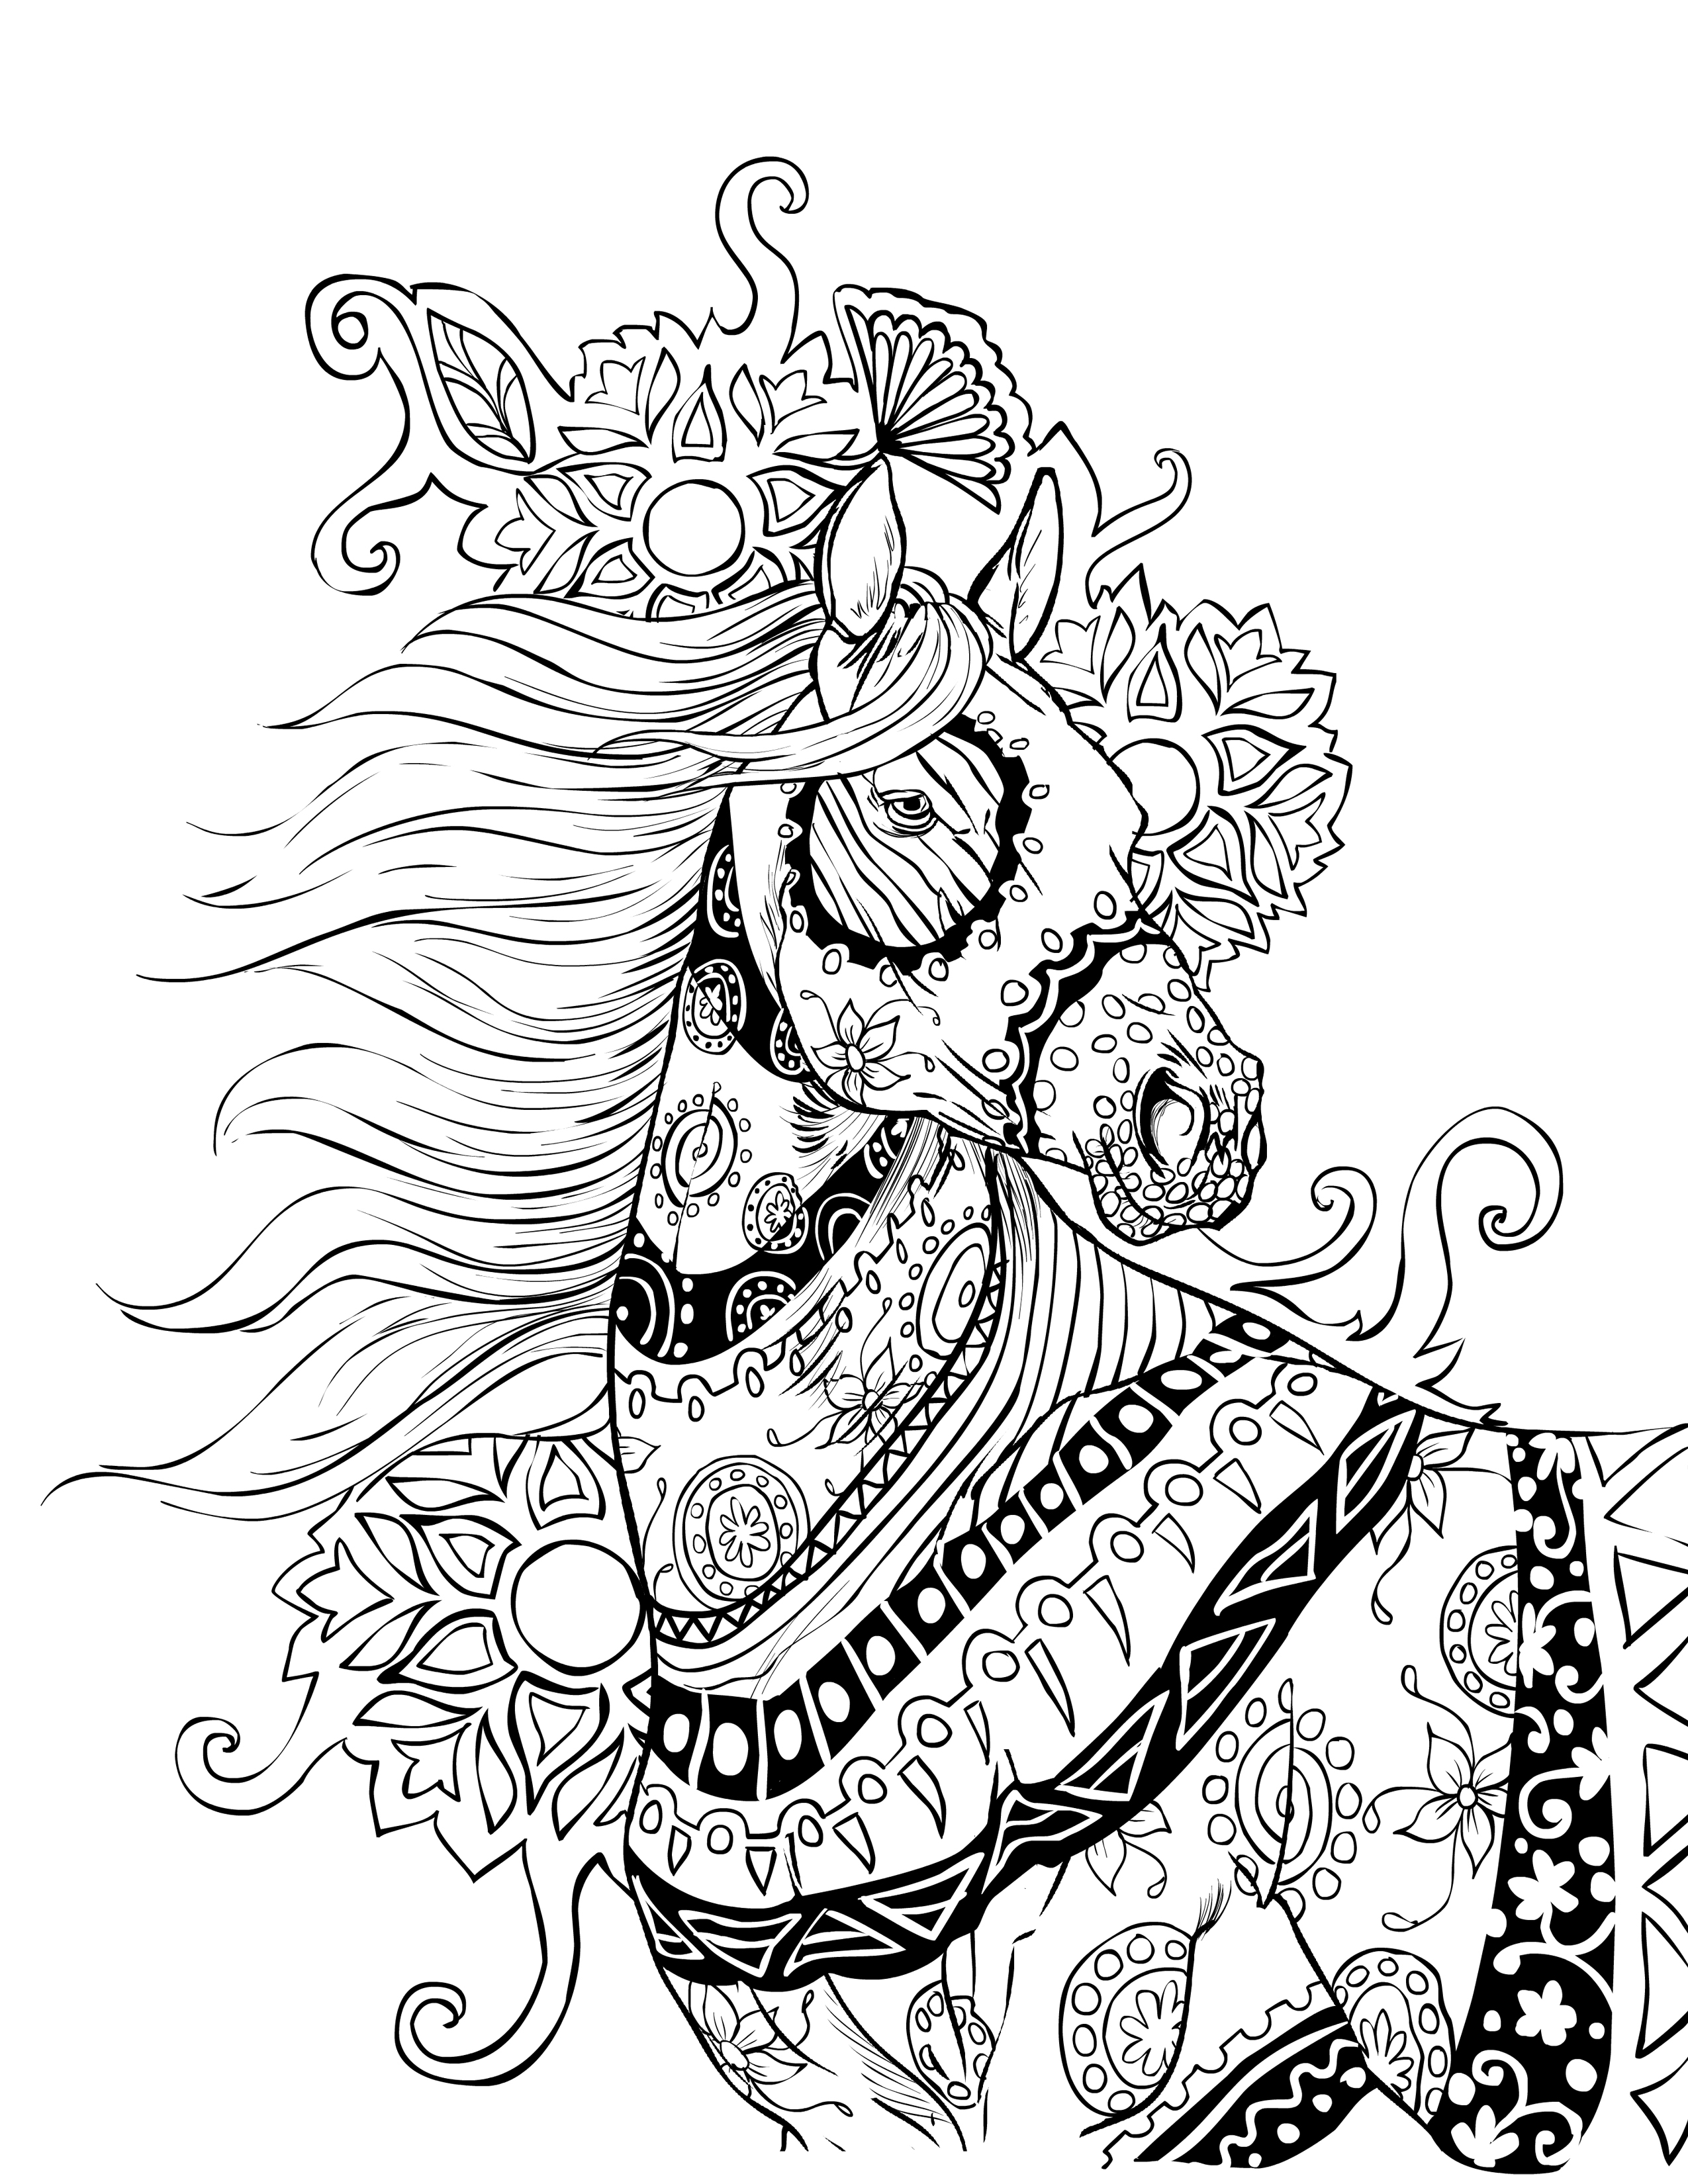 Intricate Coloring Pages For Adults Coloring Home